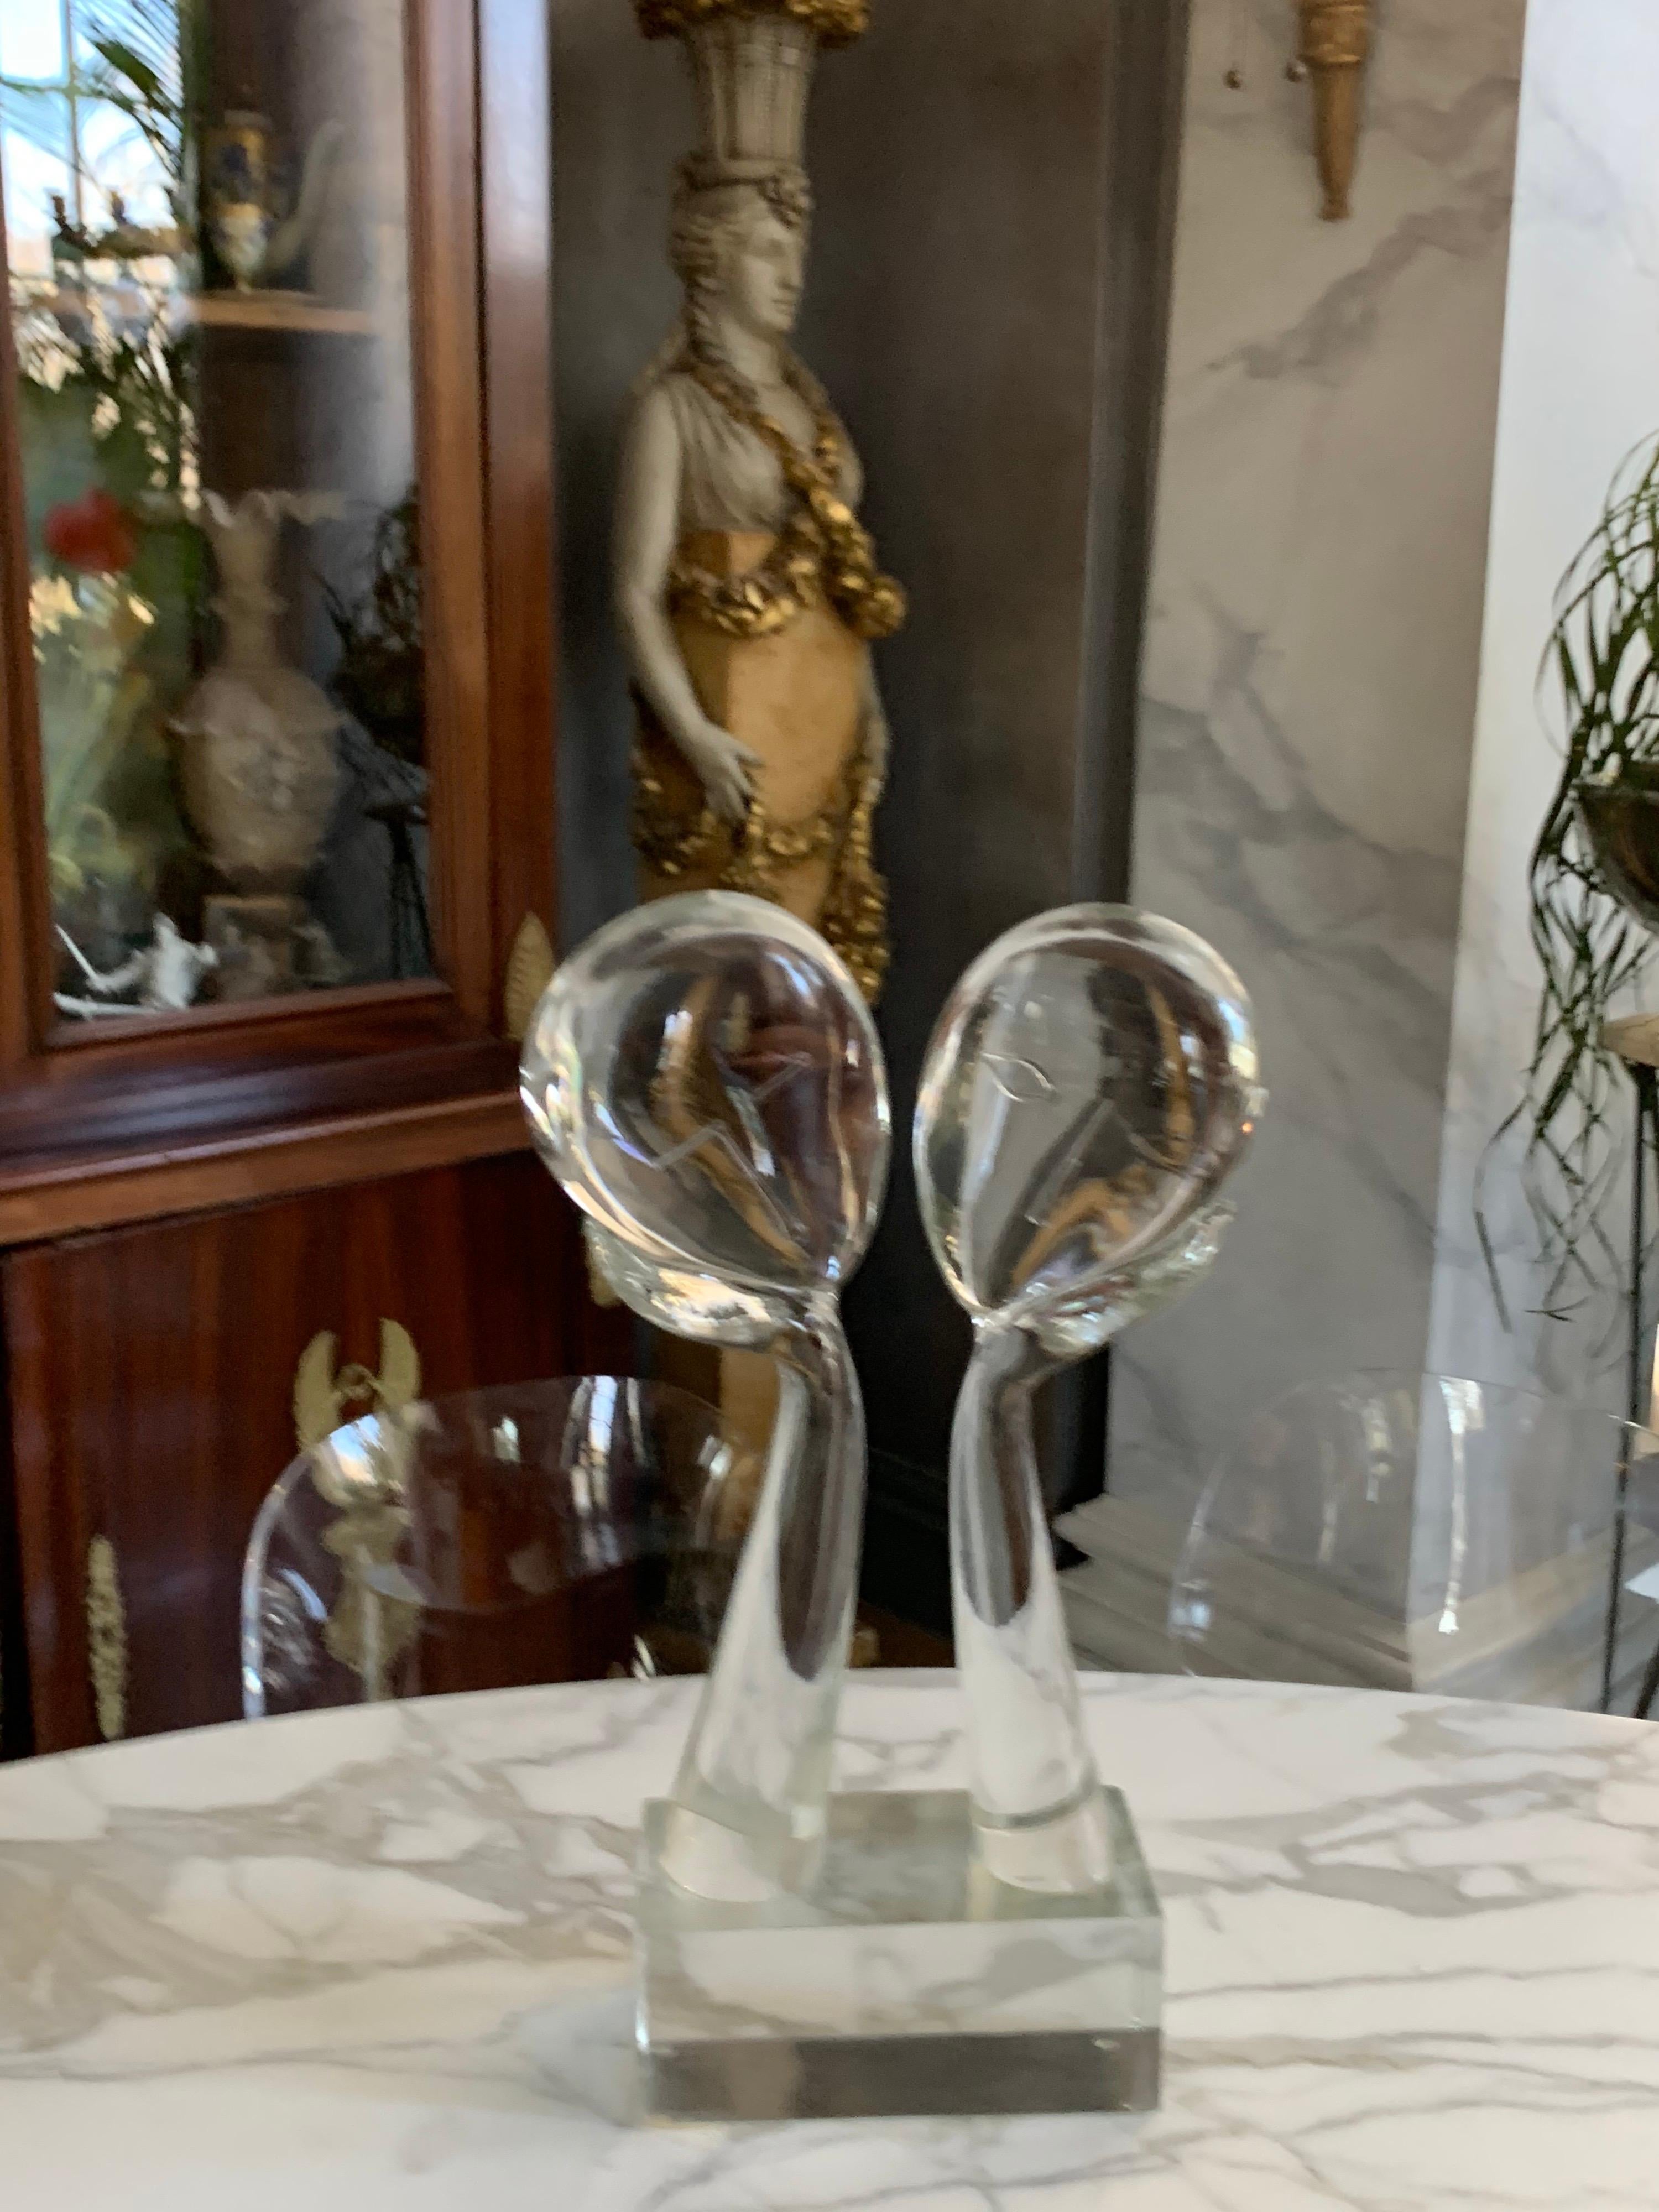 This Loredano rosin glass sculpture called “2 Faces” was made circa 1984.
Made of clear Murano glass in Italy.
Loredano Rosin (1936-19991) was a famous glass artist working with the likes such as Marc Chagall and Pablo Picasso. 

Loredano Rosin